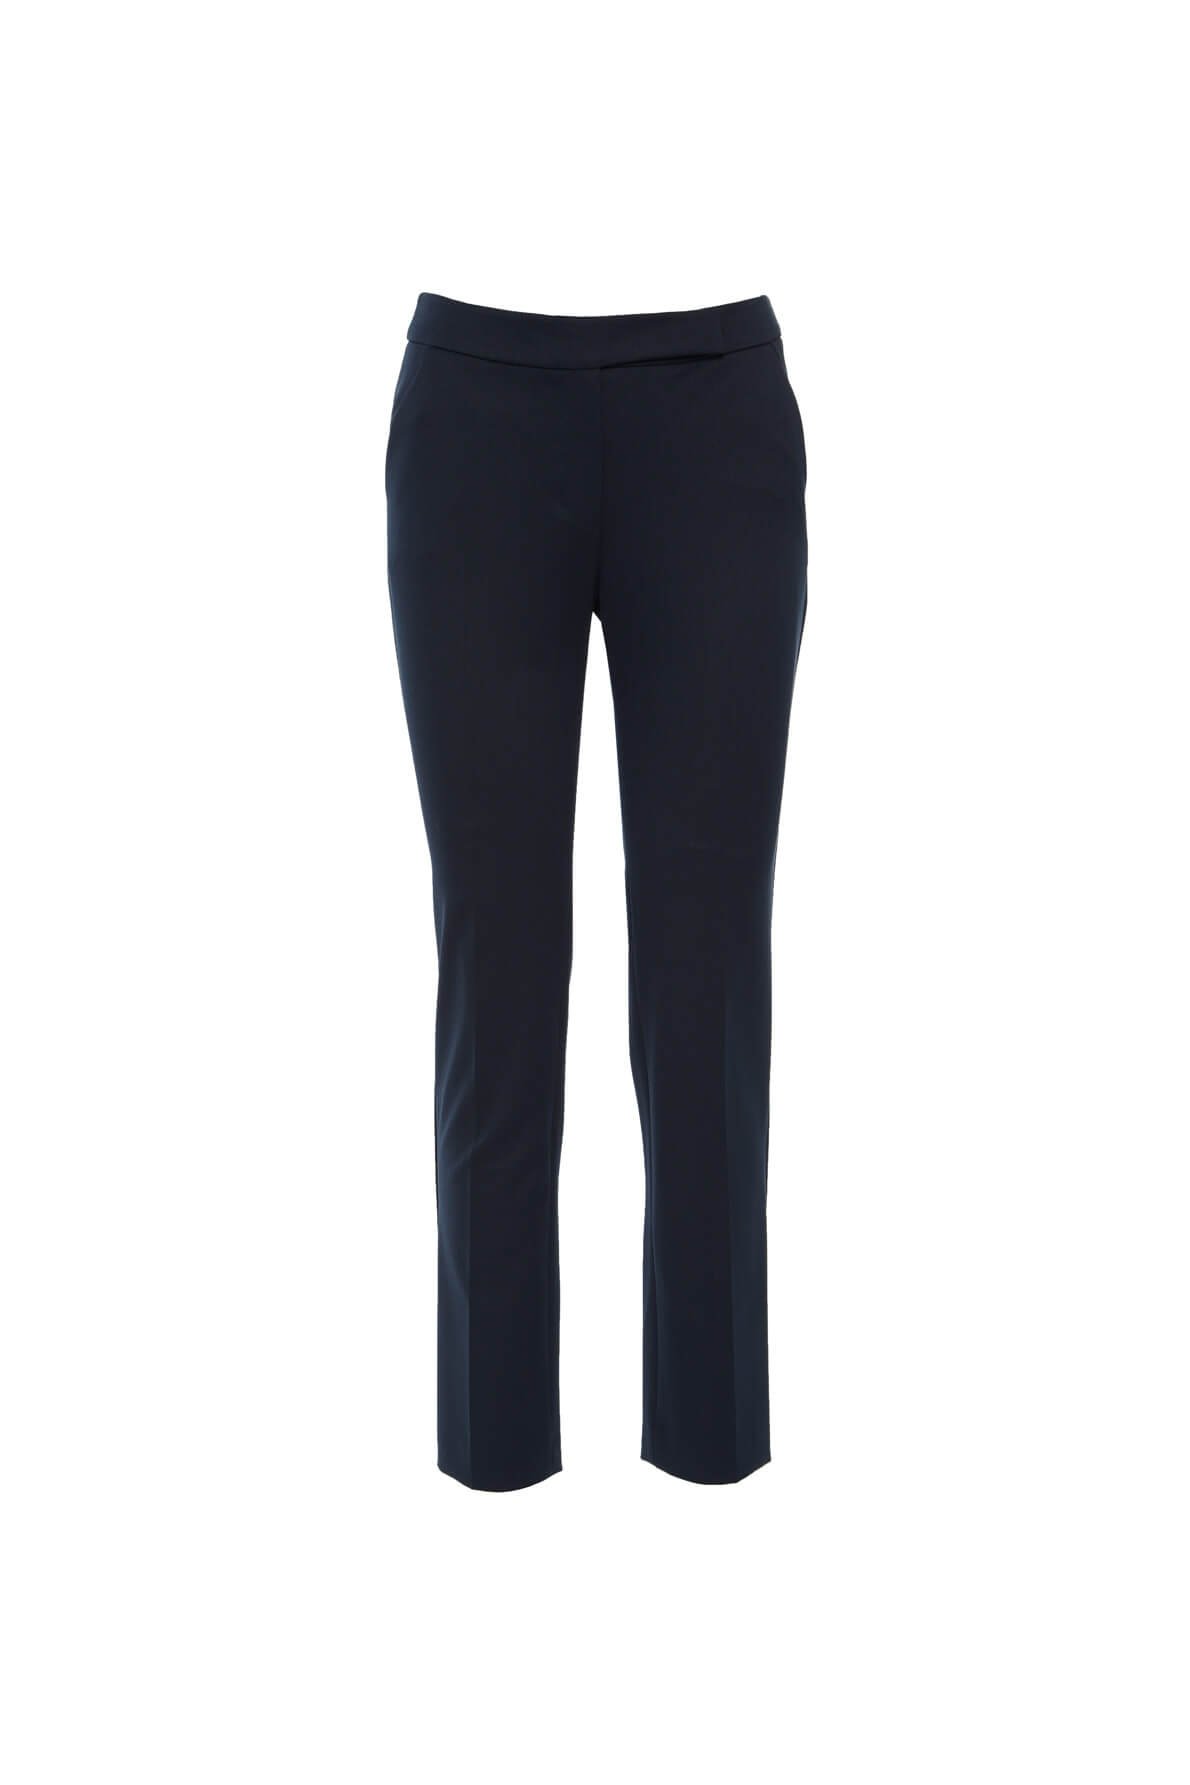 Classic Ankle Length Navy Blue Trousers - Gizia